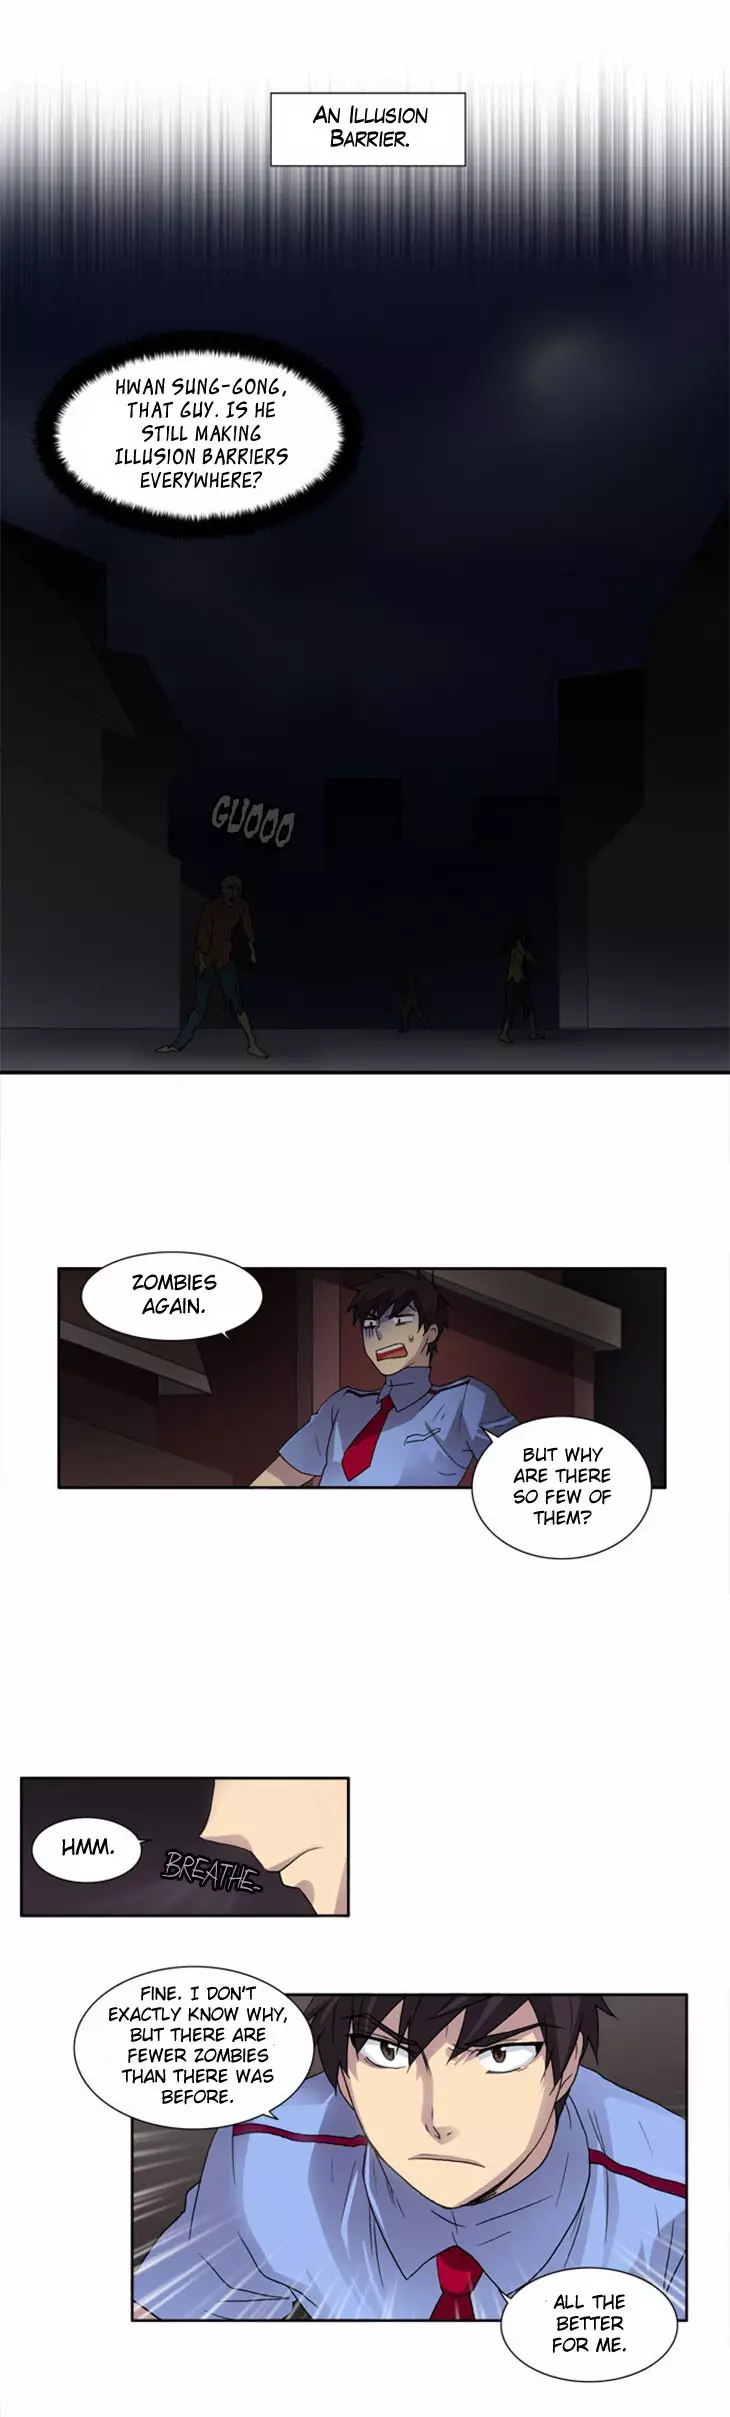 The Gamer - 11 page p_00026